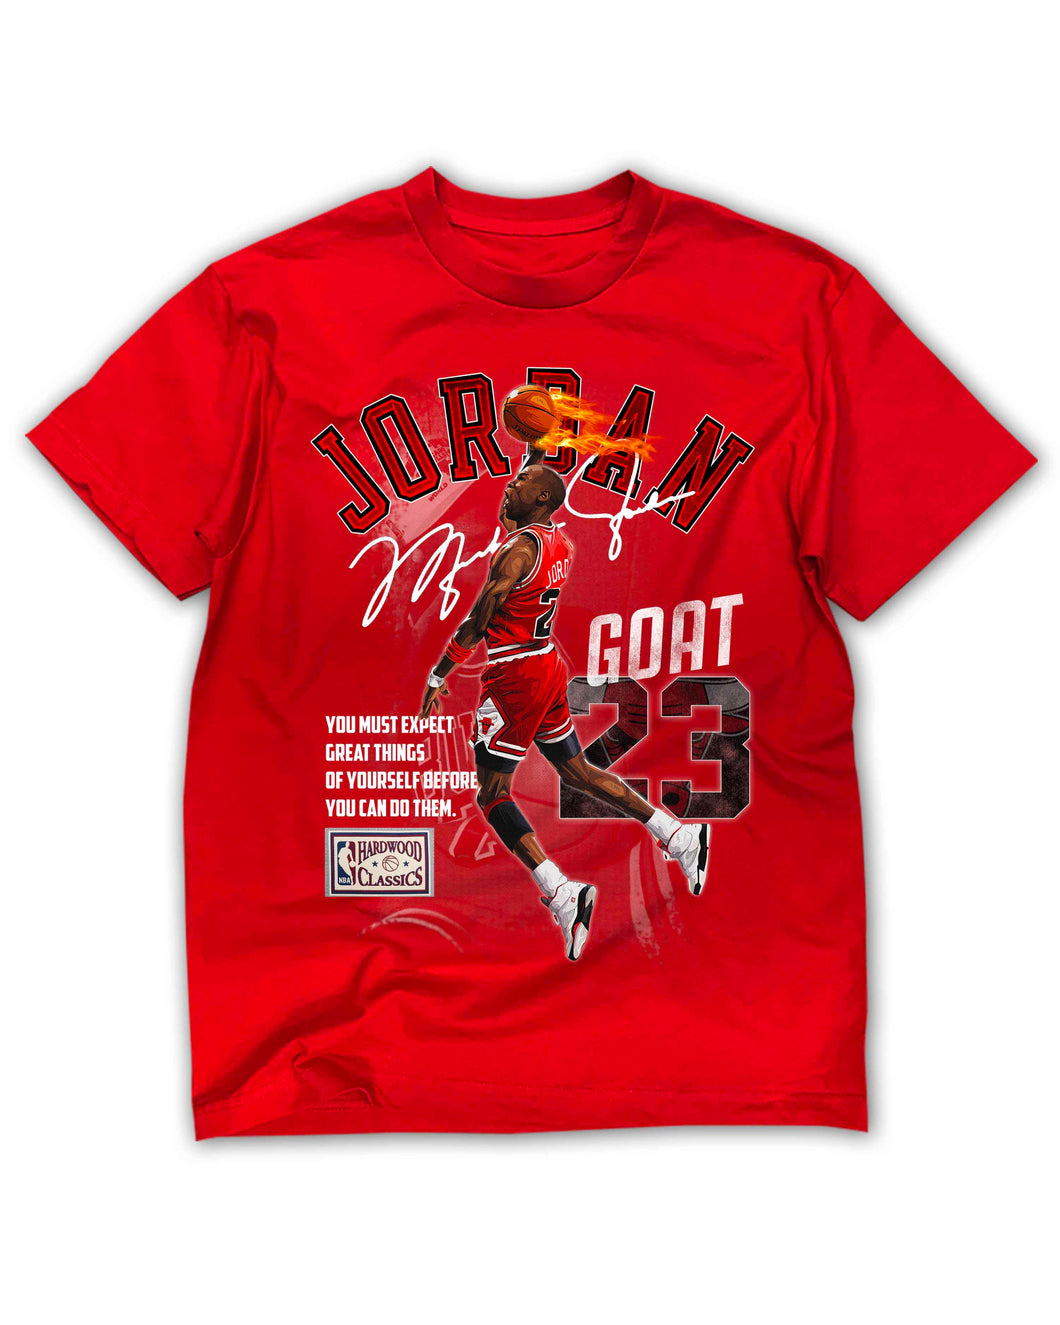 J.Goat Tee - Red